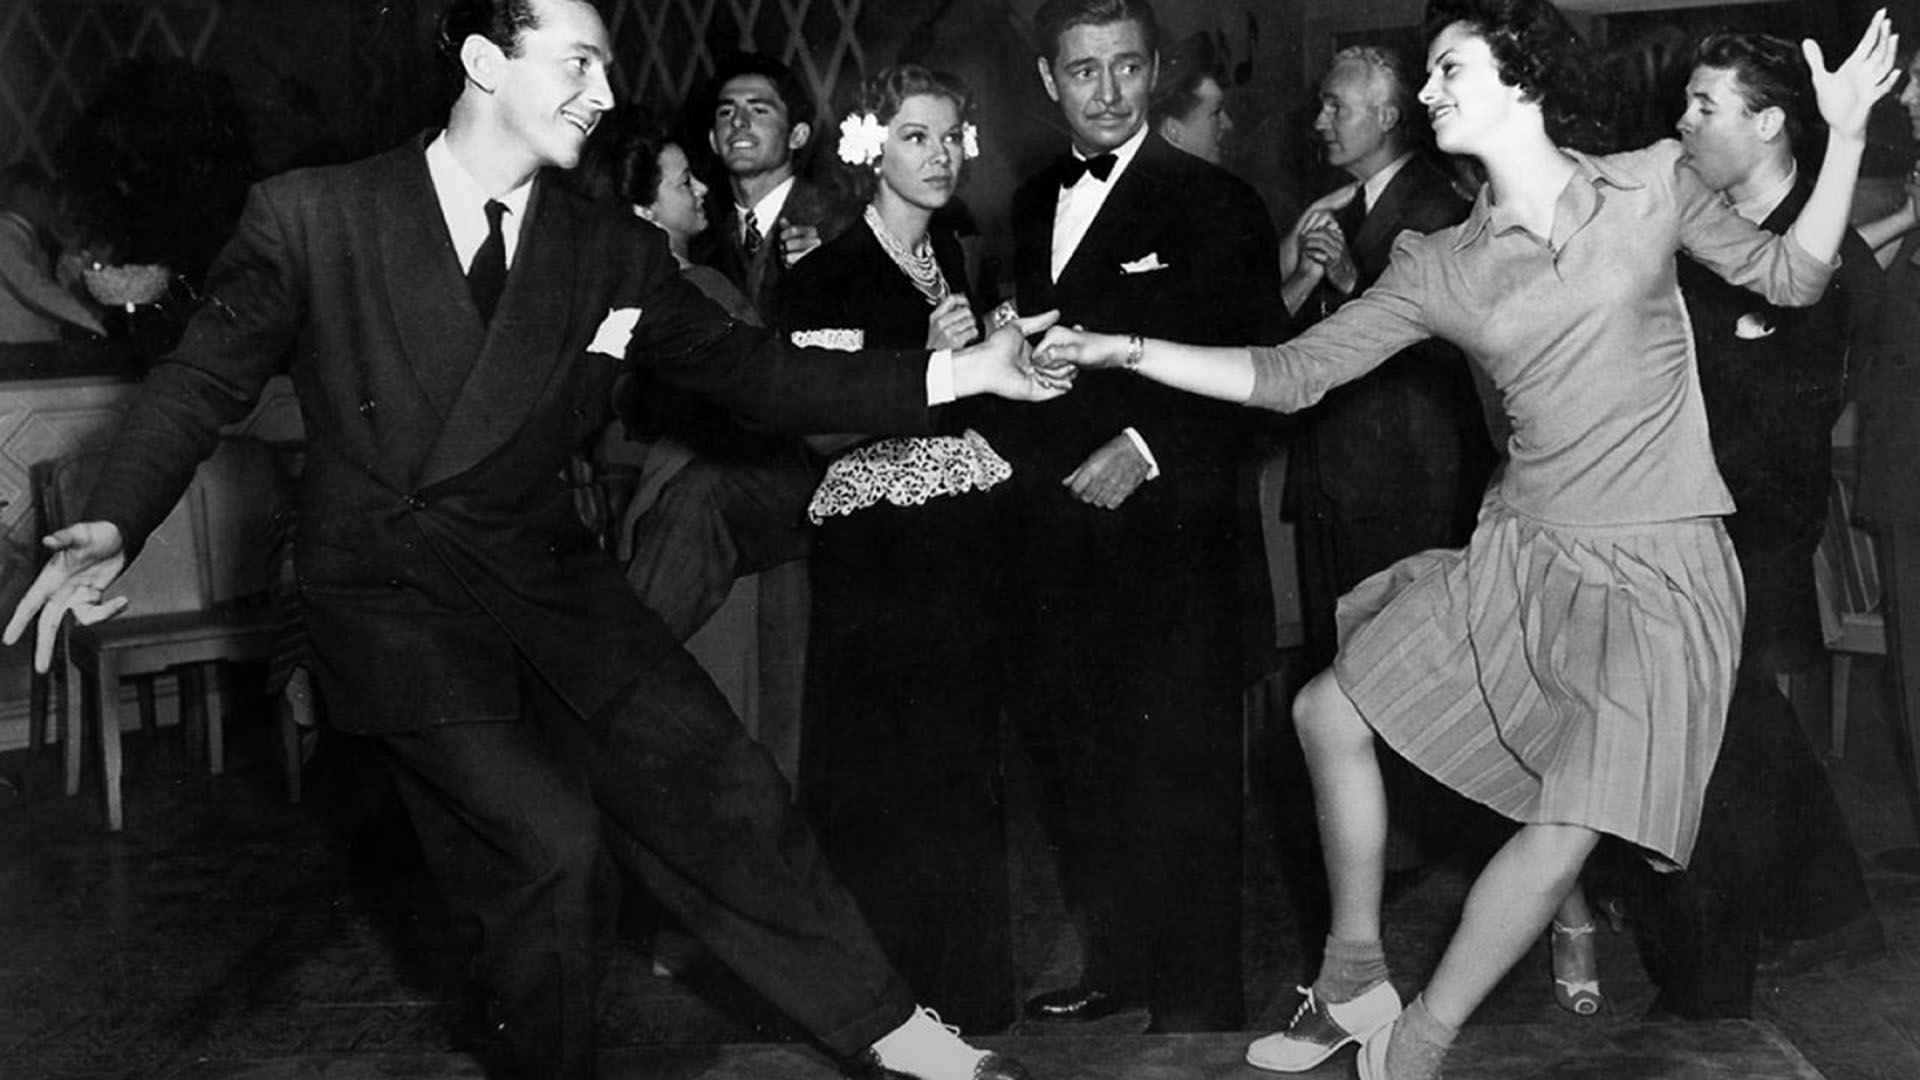 Swing Dance: West Coast Swing Dance, Both Partners Improvise Steps While Dancing Together, 1950s. 1920x1080 Full HD Background.